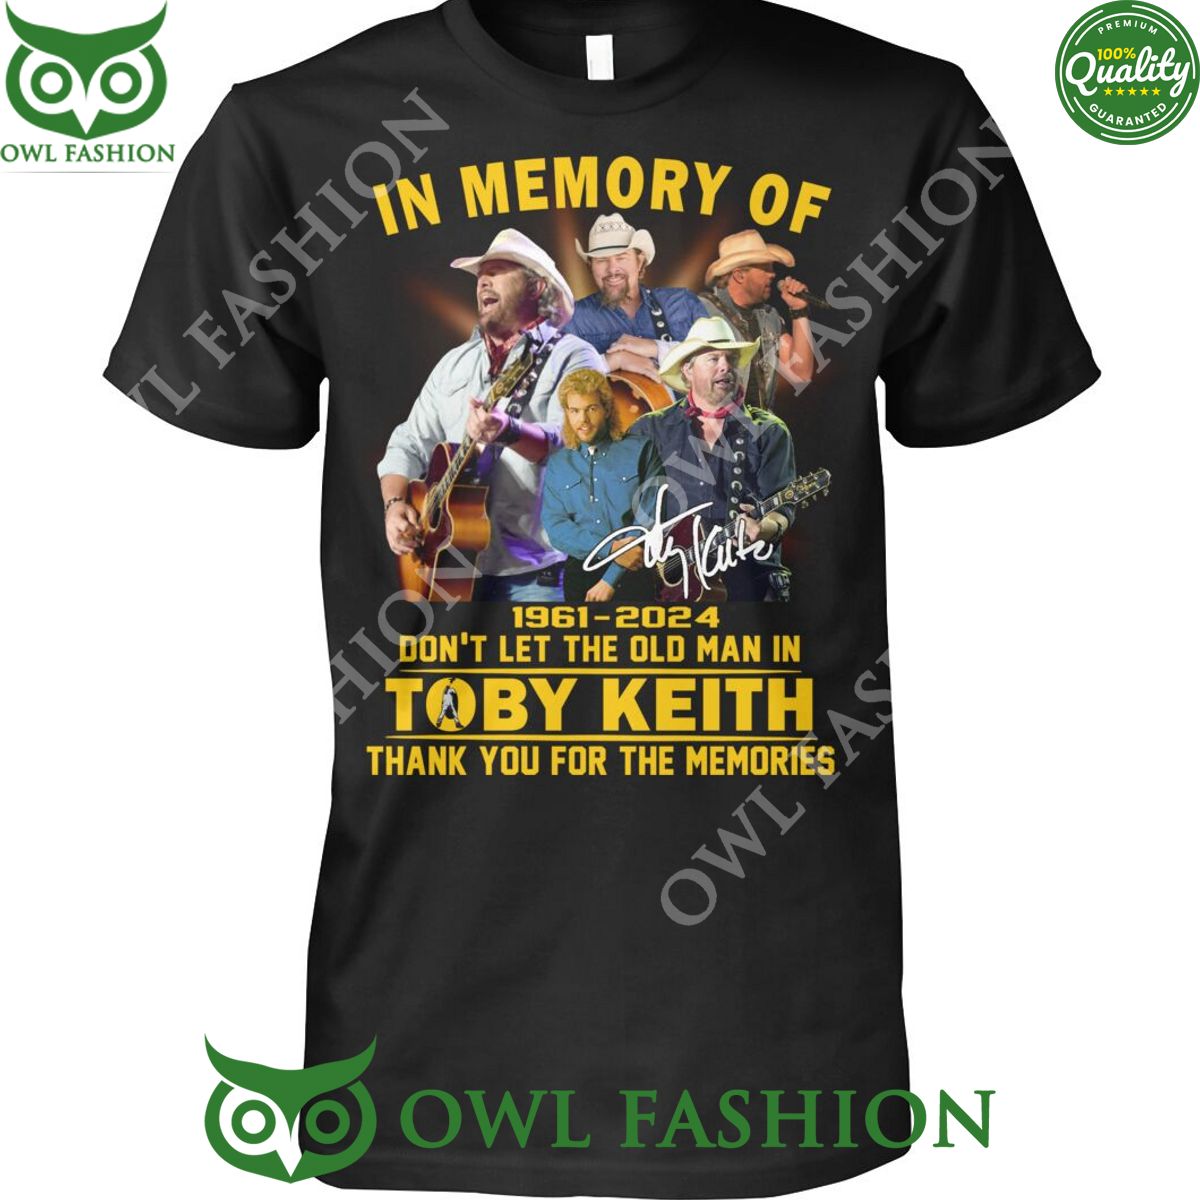 in memory of toby keith thank you 1961 2024 dont let the old man in t shirt 1 VT79e.jpg